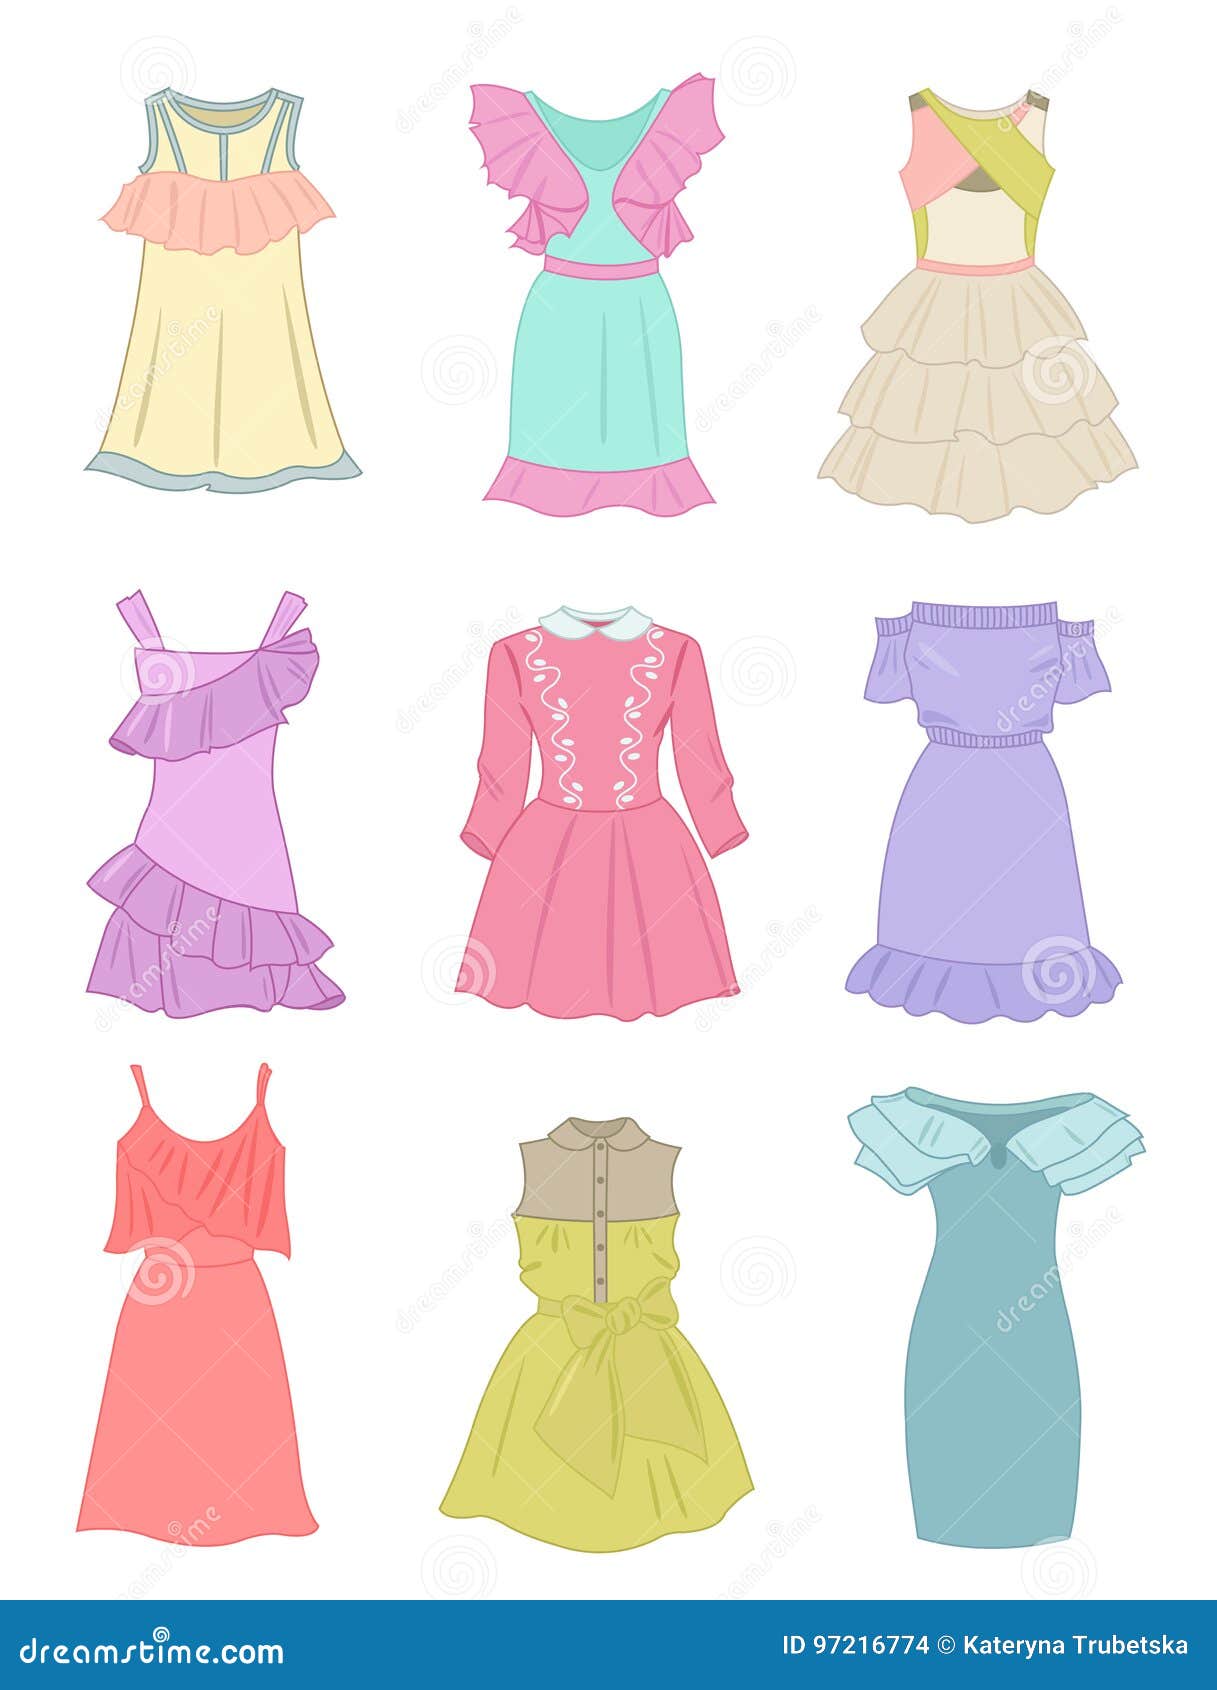 Baby doll dress stock vector. Illustration of objects - 97216774